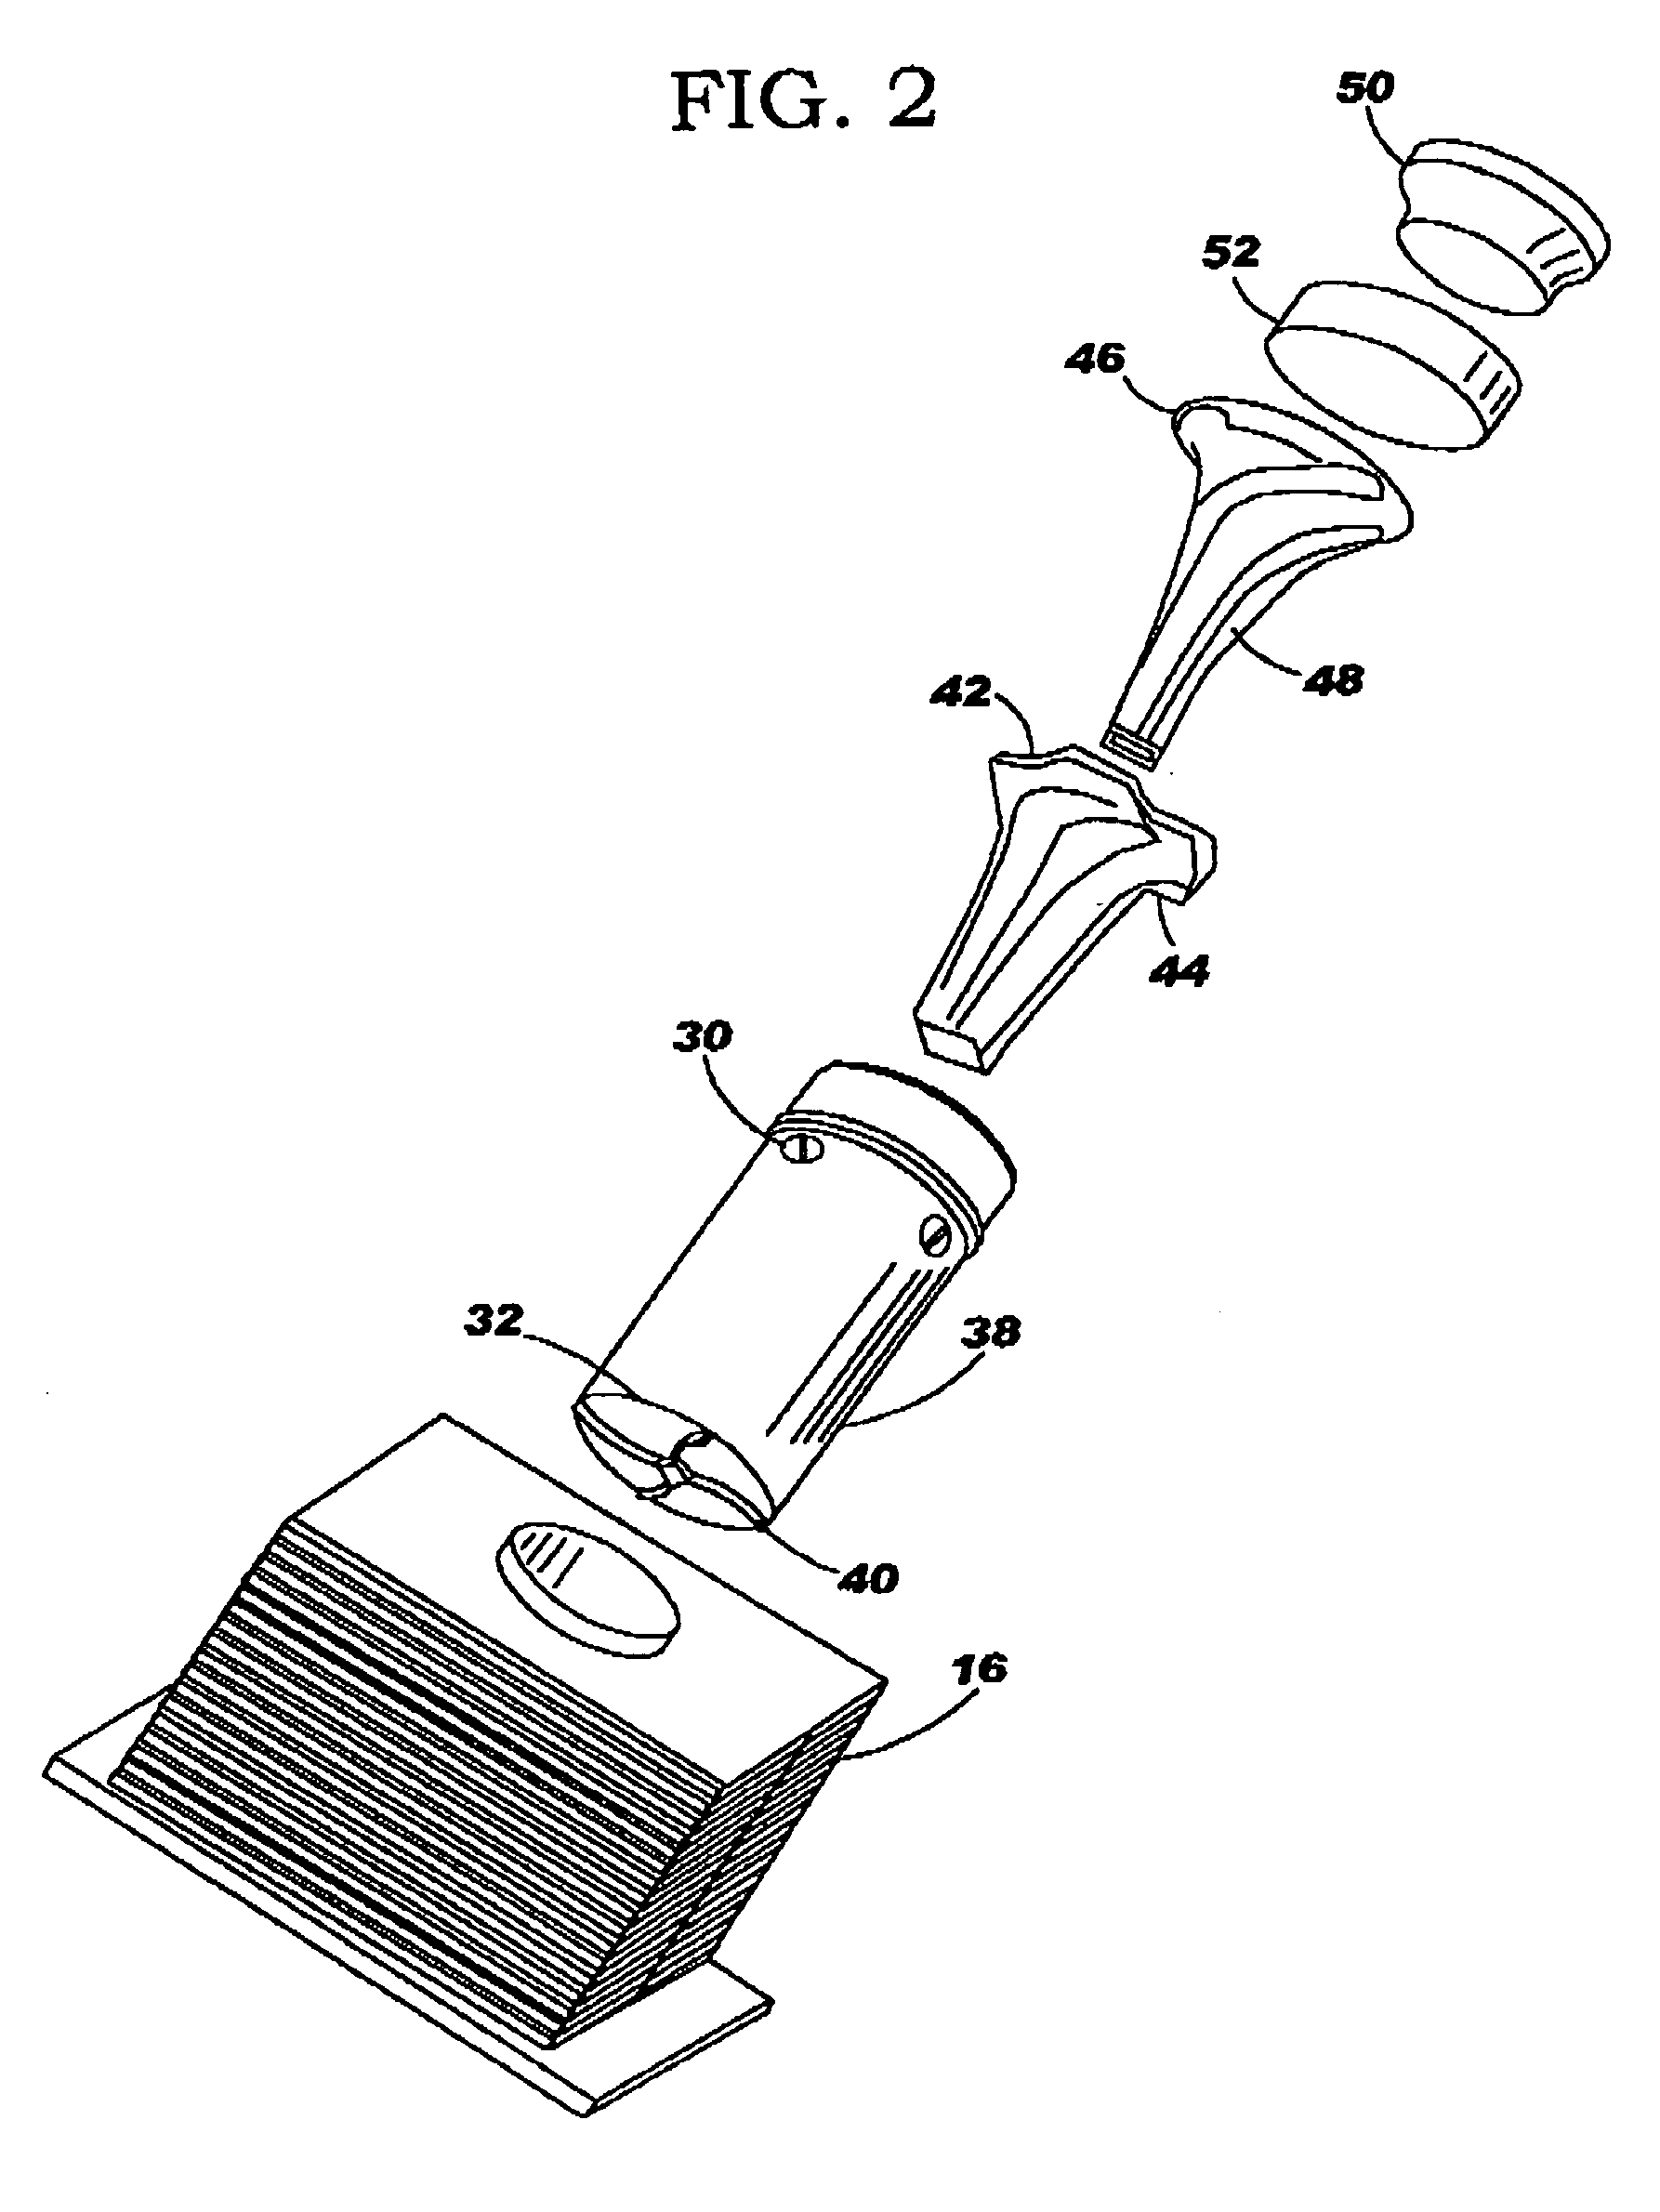 Minimal fluid forced convective heat sink for high power computers